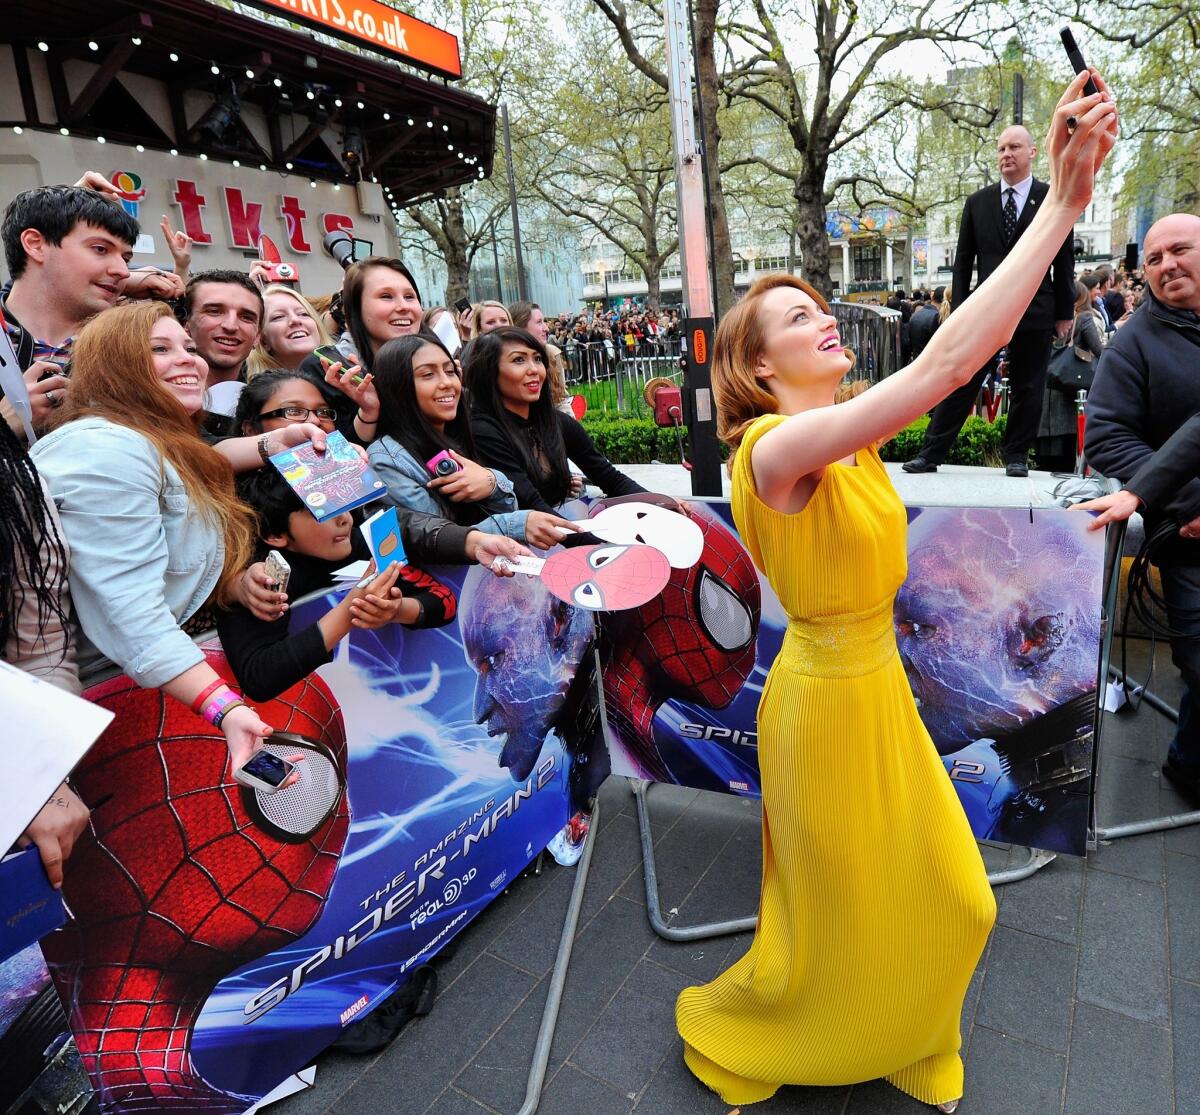 Actress Emma Stone with fans as she attends "The Amazing Spider-Man 2" world premiere at the Odeon Leicester Square in London.